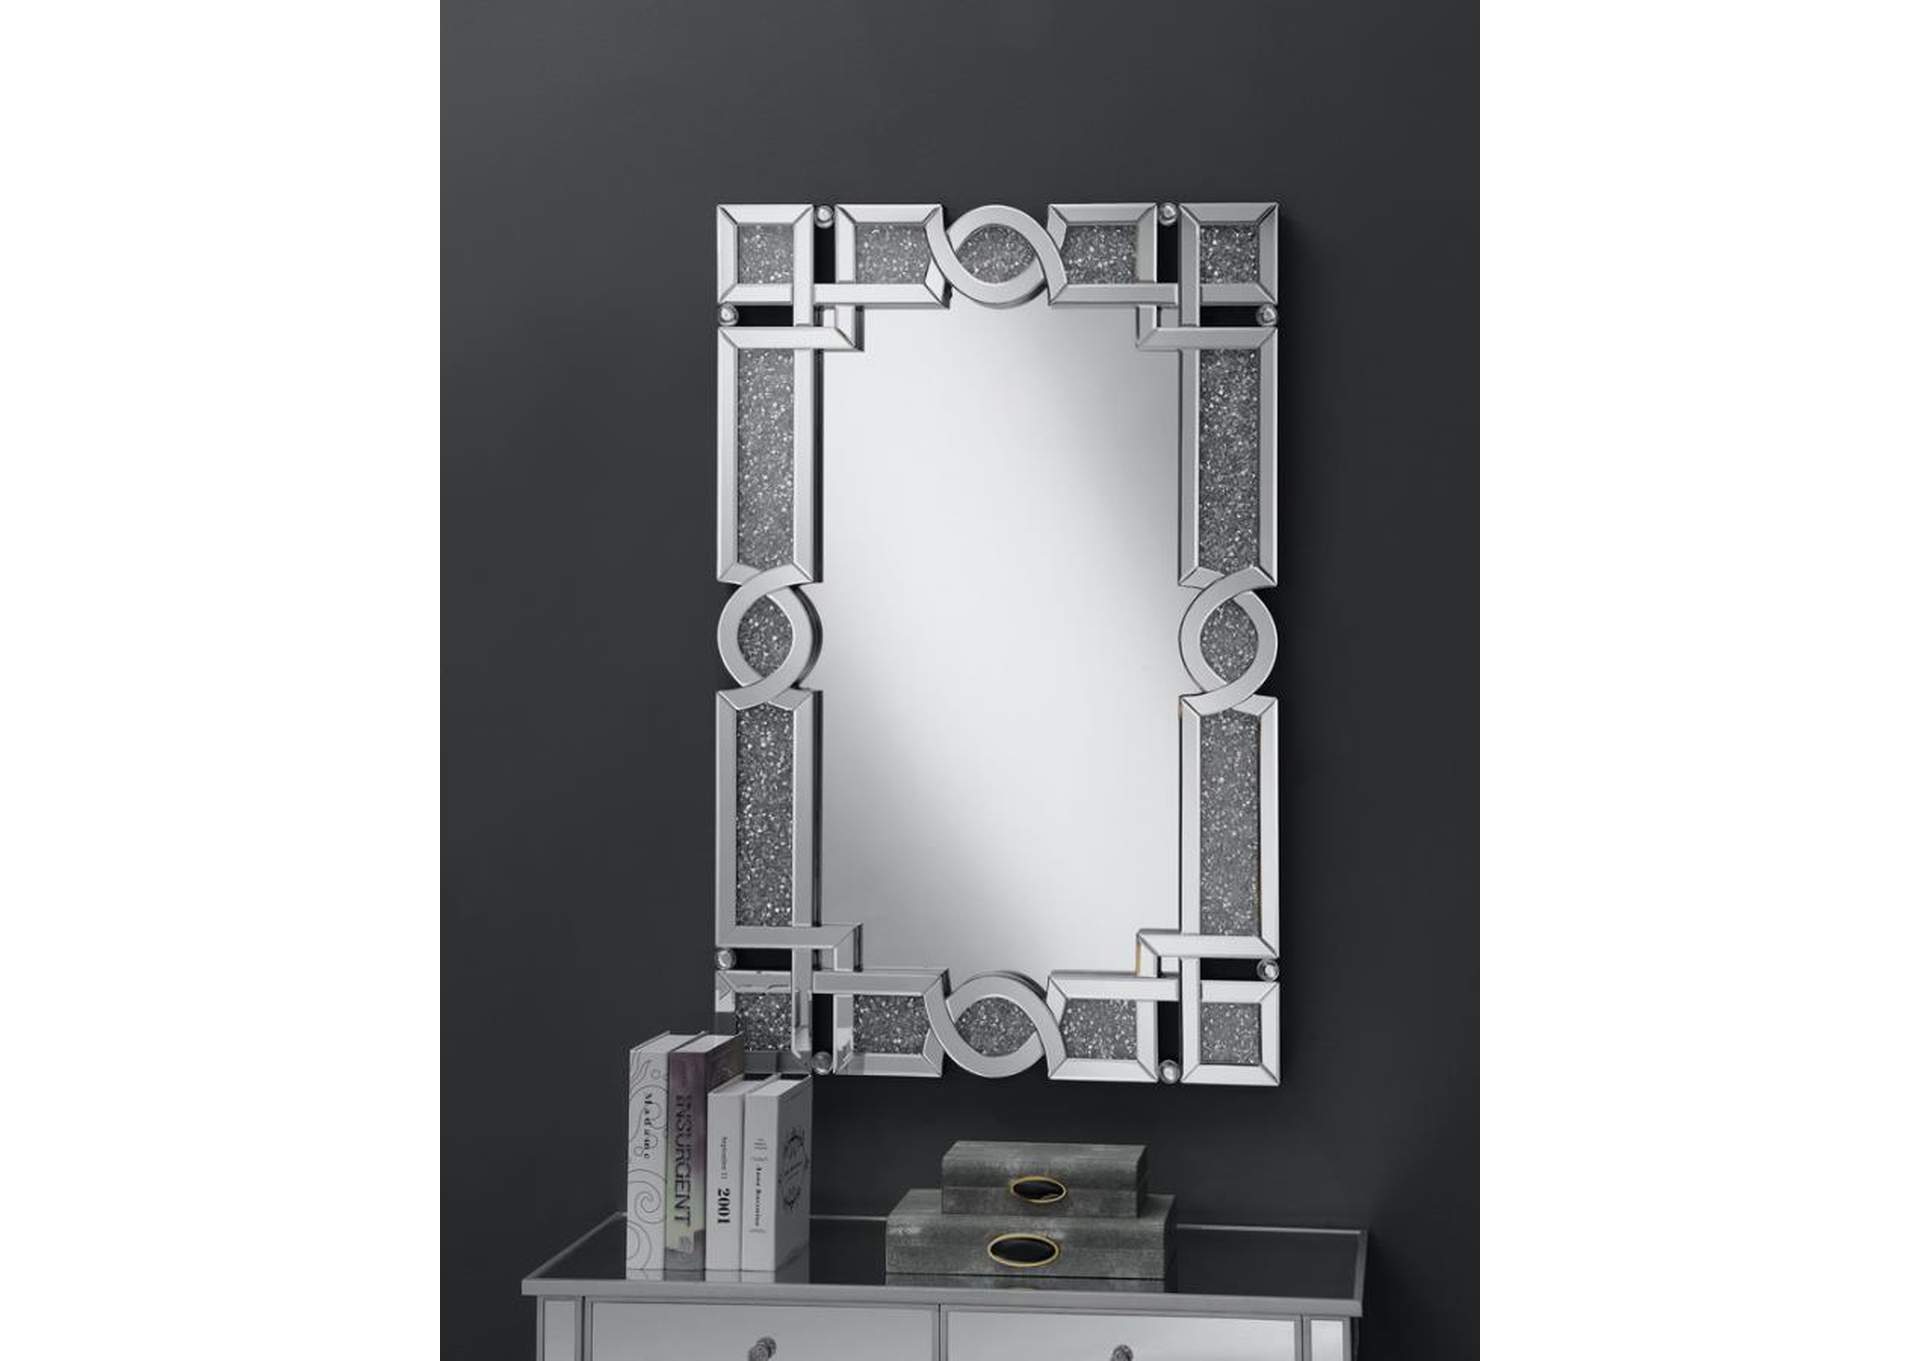 Jackie Interlocking Wall Mirror with Iridescent Panel and Beads Silver,Coaster Furniture